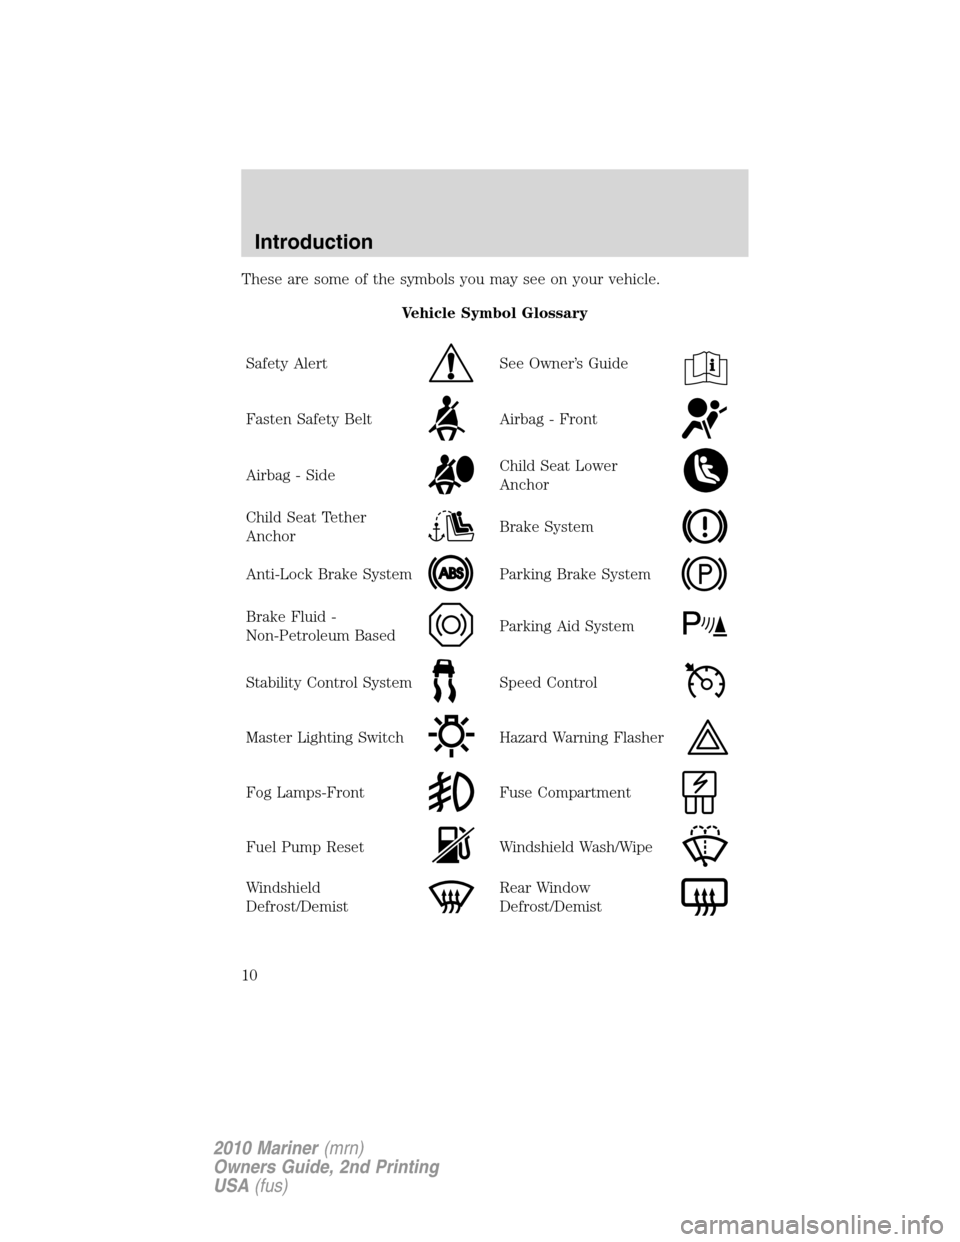 Mercury Mariner 2010  Owners Manuals These are some of the symbols you may see on your vehicle.
Vehicle Symbol Glossary
Safety Alert
See Owner’s Guide
Fasten Safety BeltAirbag - Front
Airbag - SideChild Seat Lower
Anchor
Child Seat Tet